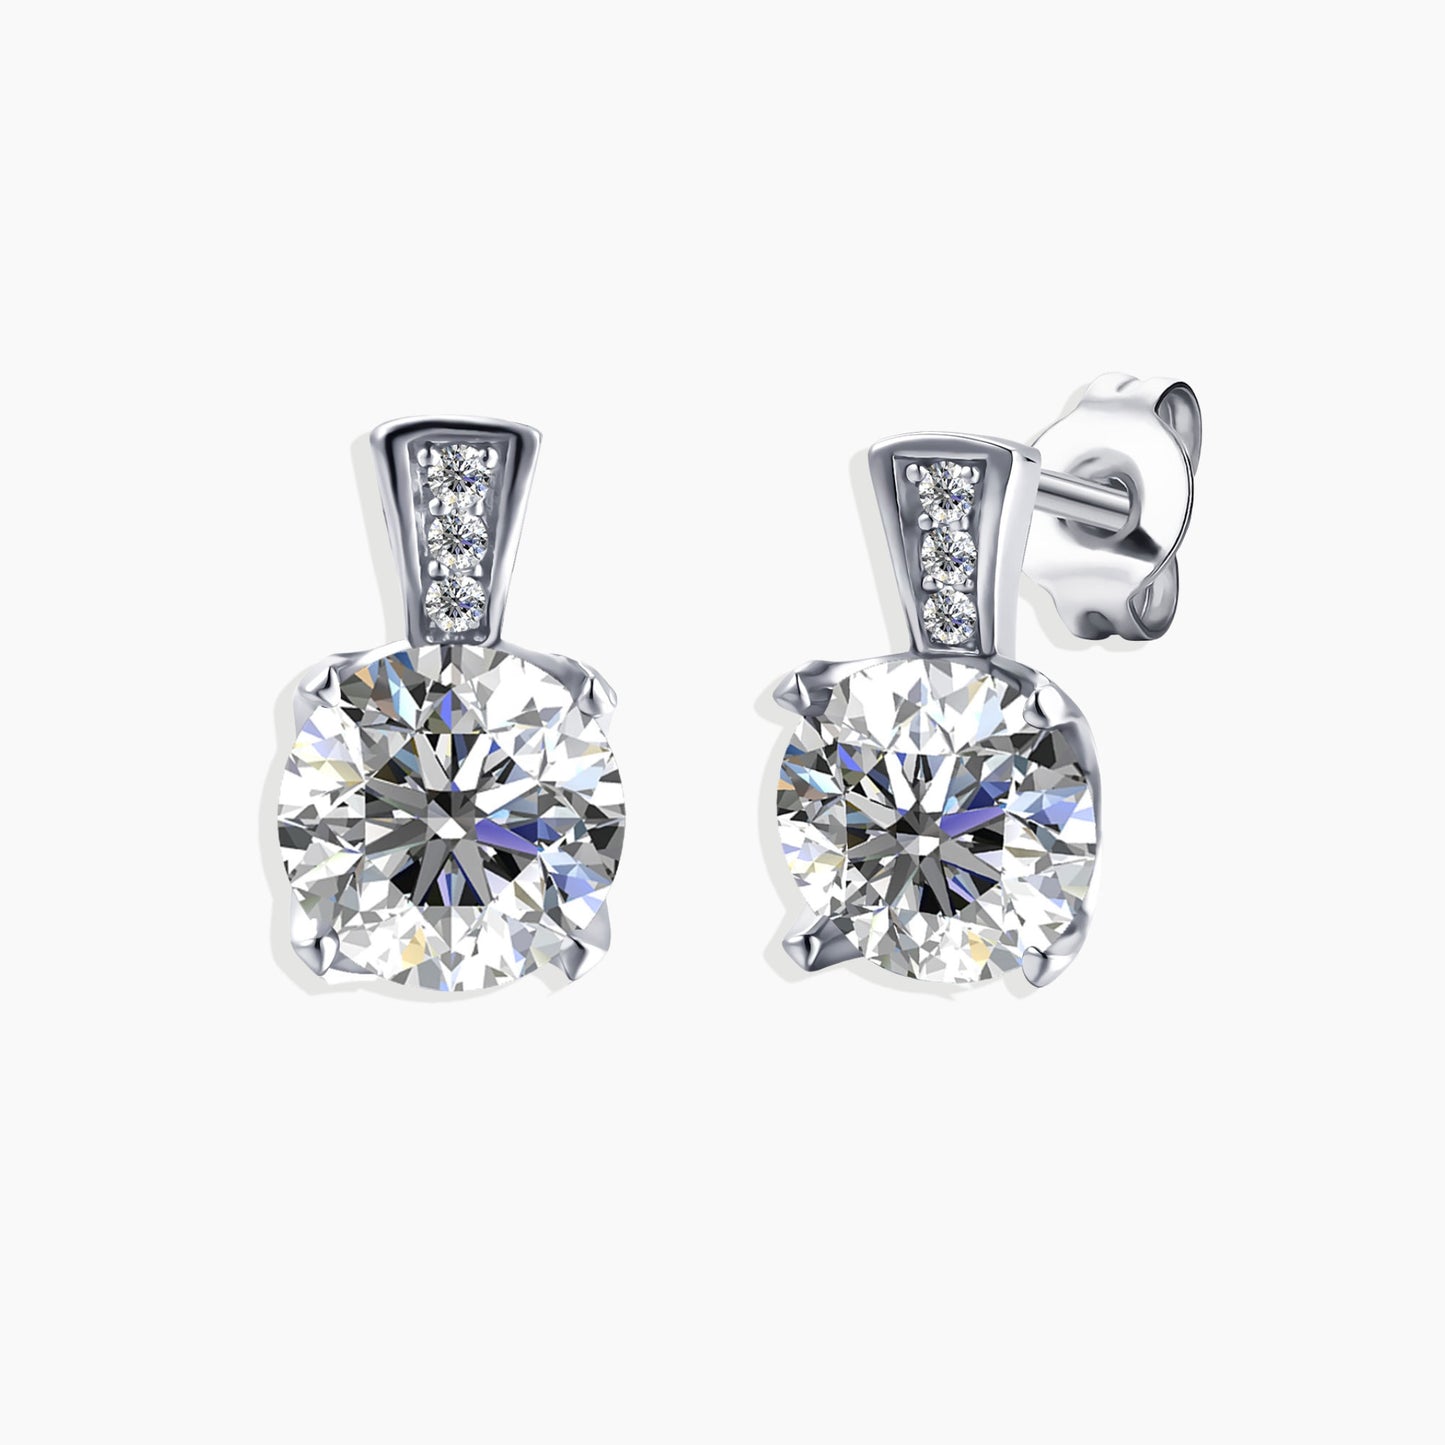 Moissanite 1ct. Scintillait Earrings in Sterling Silver